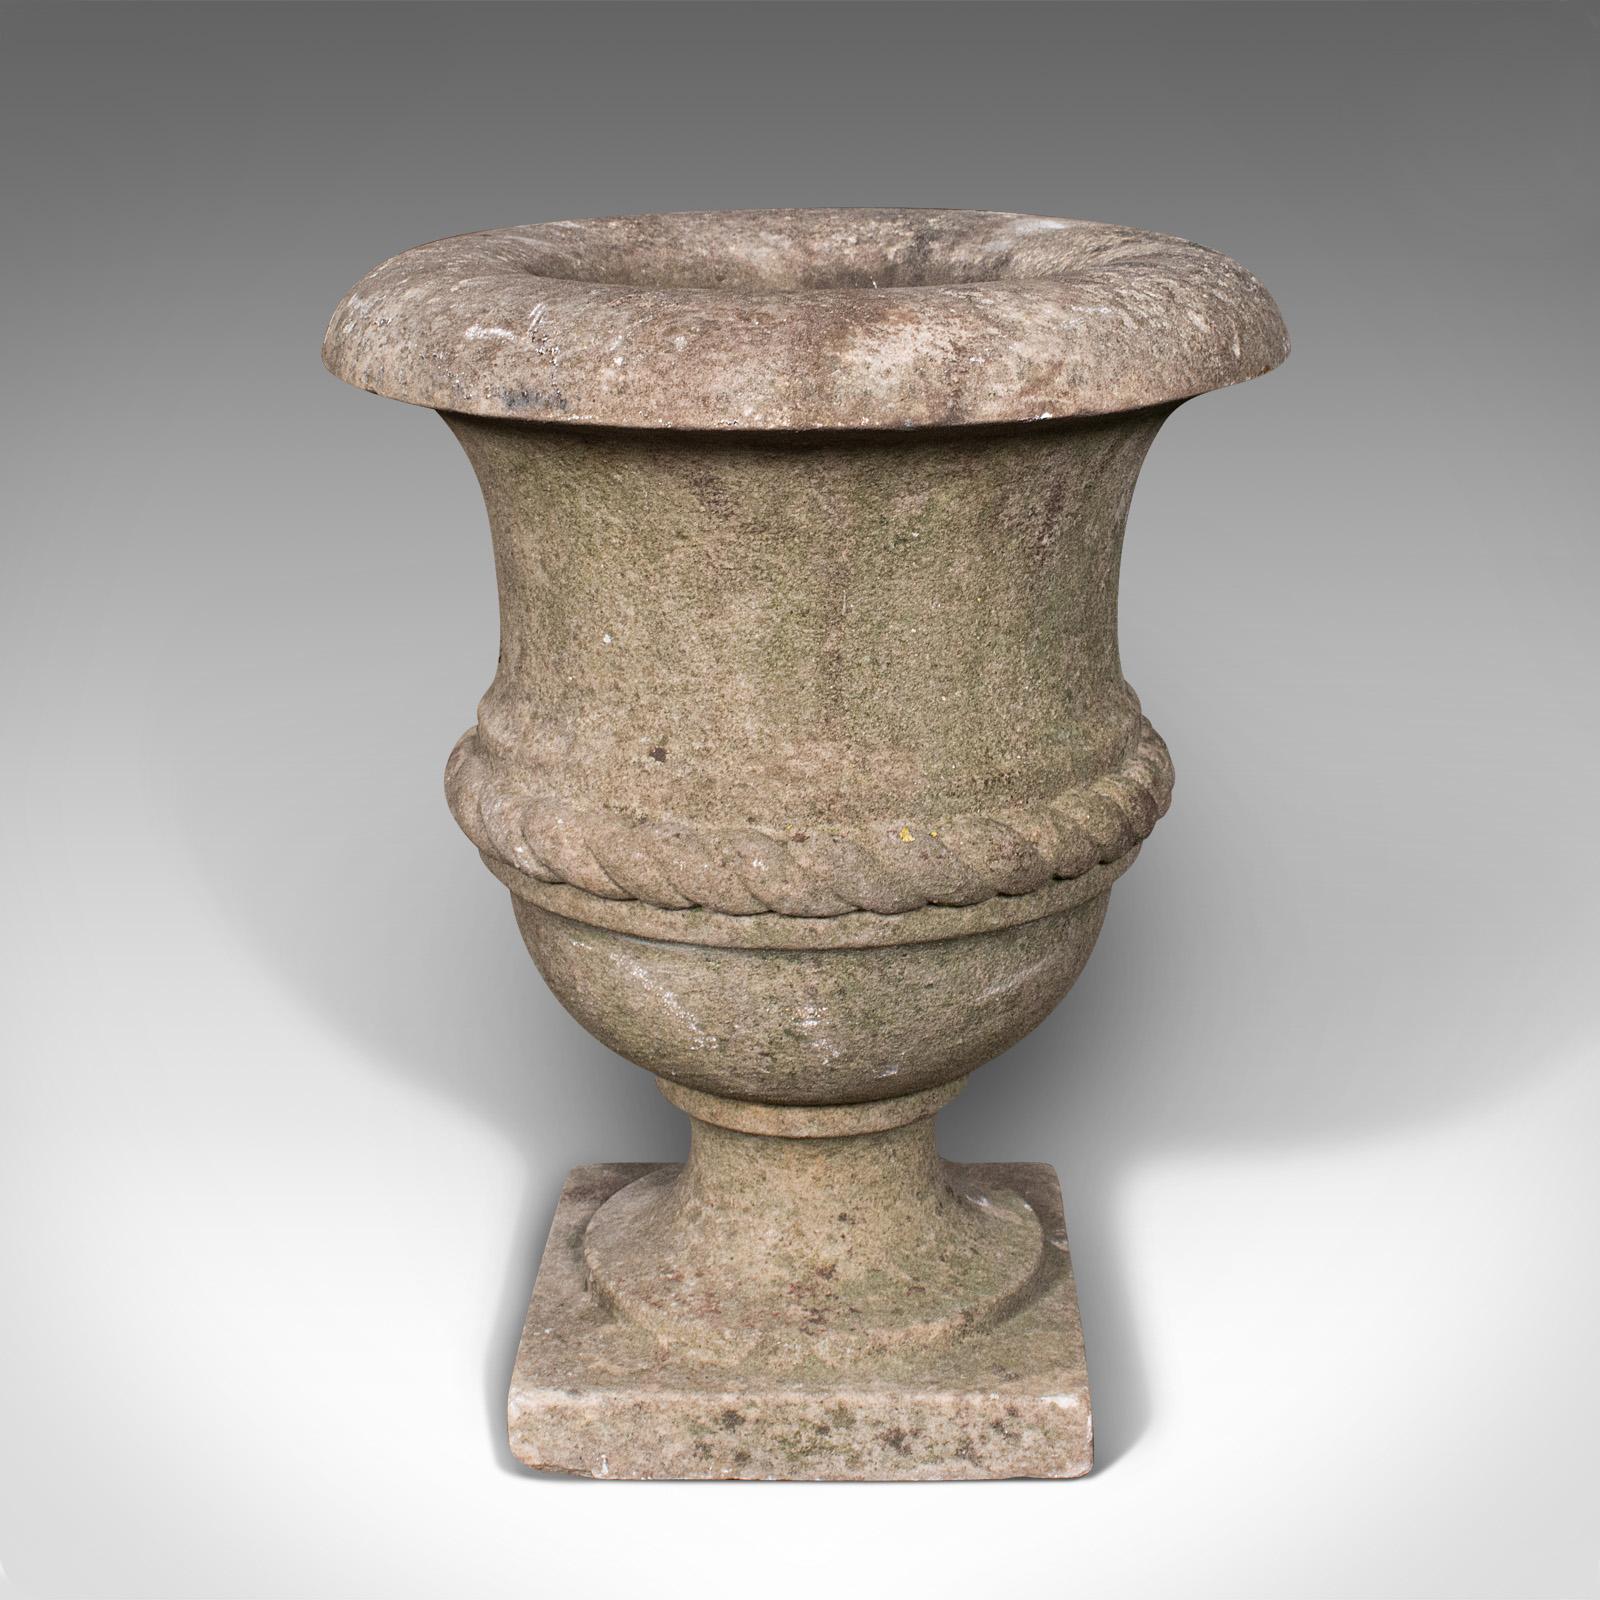 This is a small antique planting urn. An English, weathered marble decorative jardiniere, dating to the Victorian period, circa 1870.

Delightfully weathered from decades of outdoor display
Displaying a desirable aged patina with a light covering